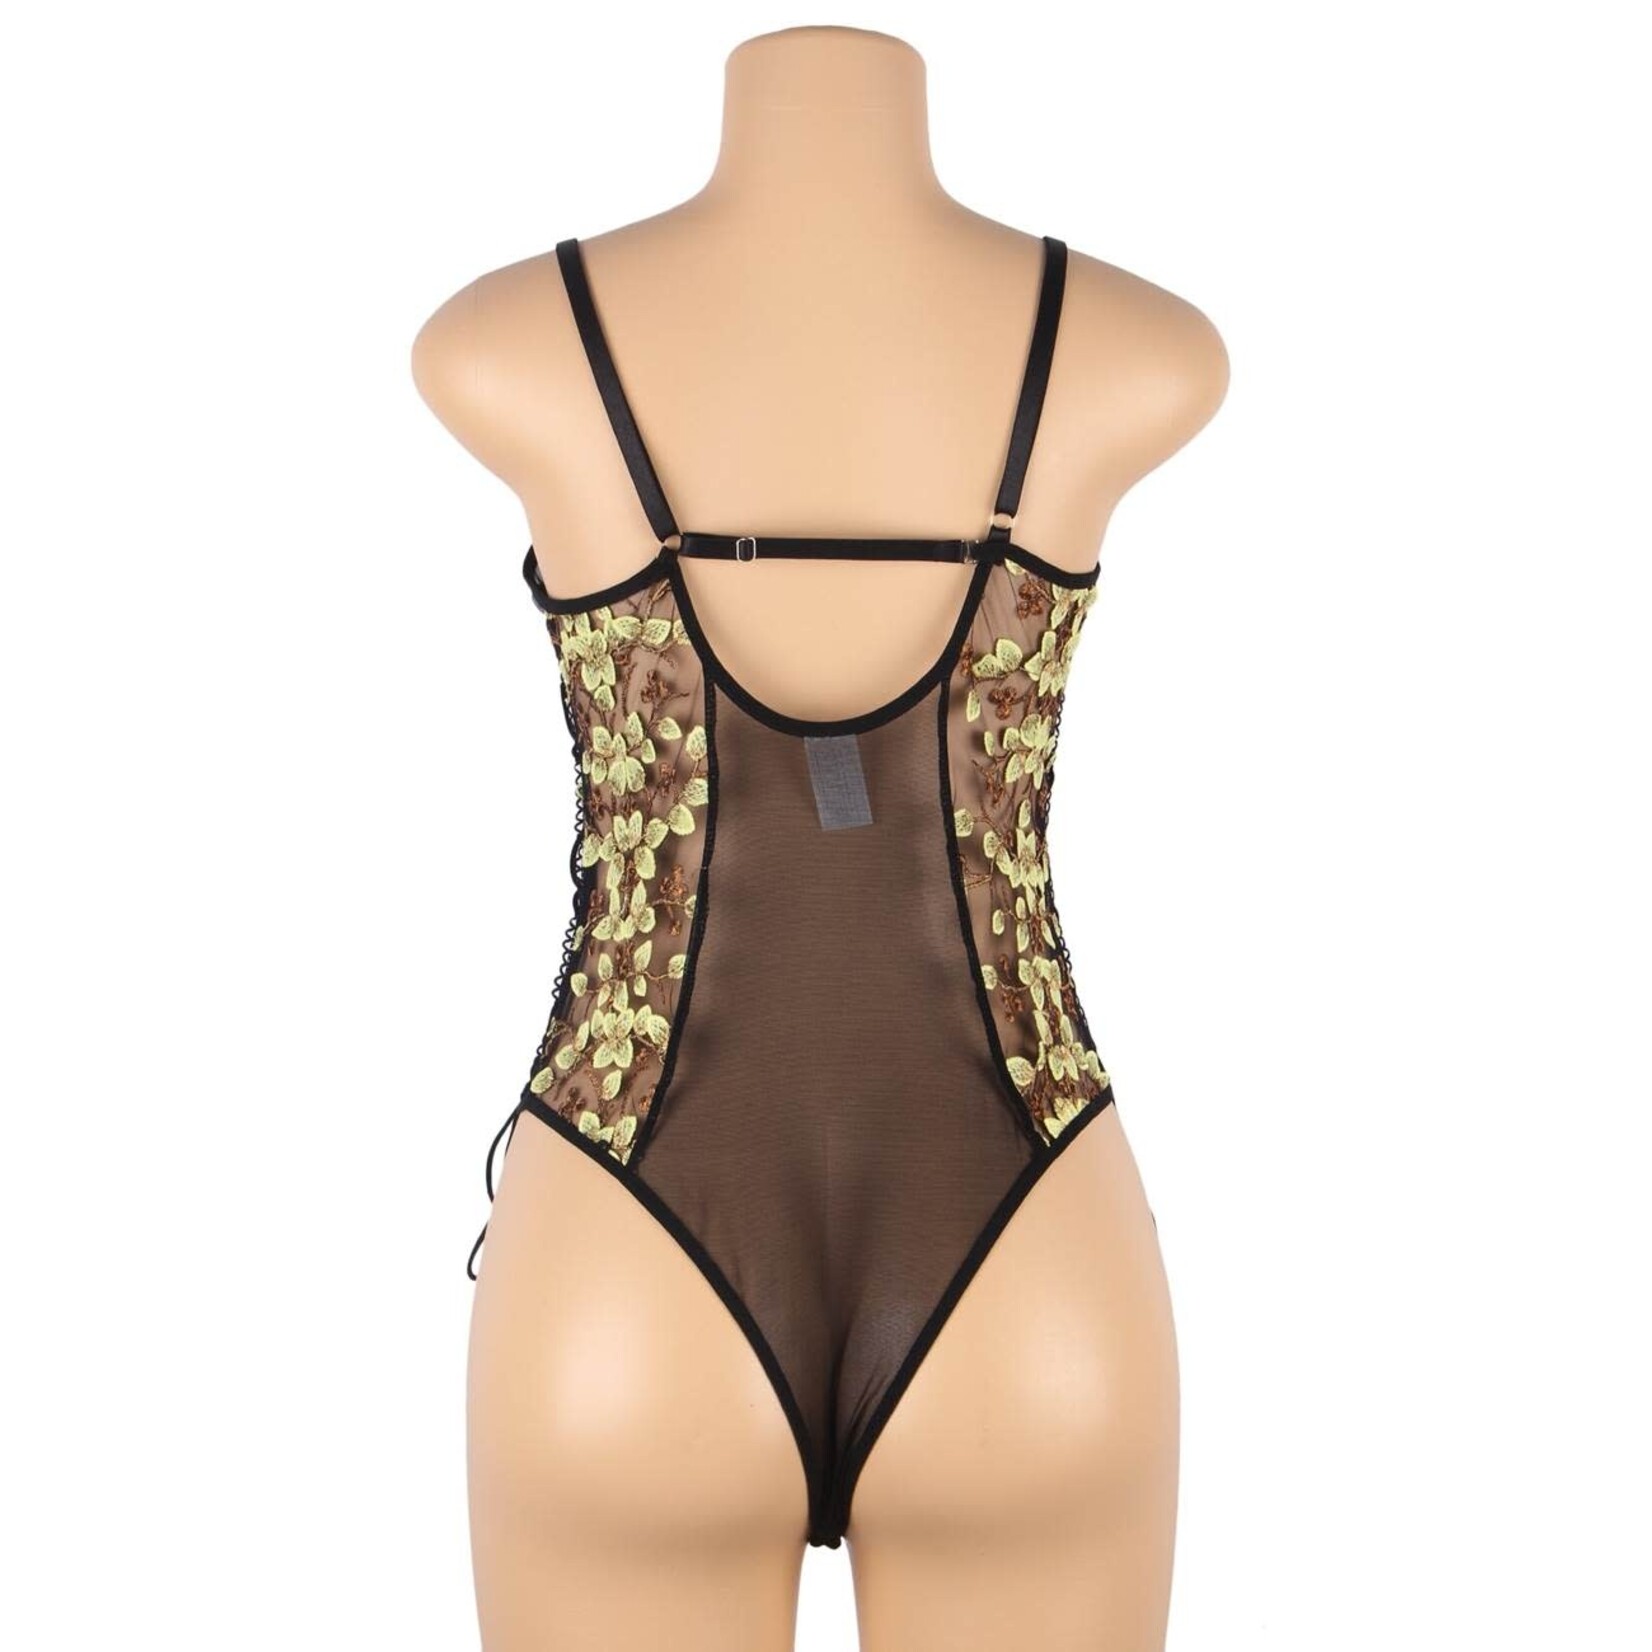 OH YEAH! -  FASHION EMBROIDERY BLACK MESH BODYSUIT WITH UNDERWIRE MATERIAL:95% POLYESTER + 5% SPANDEX M